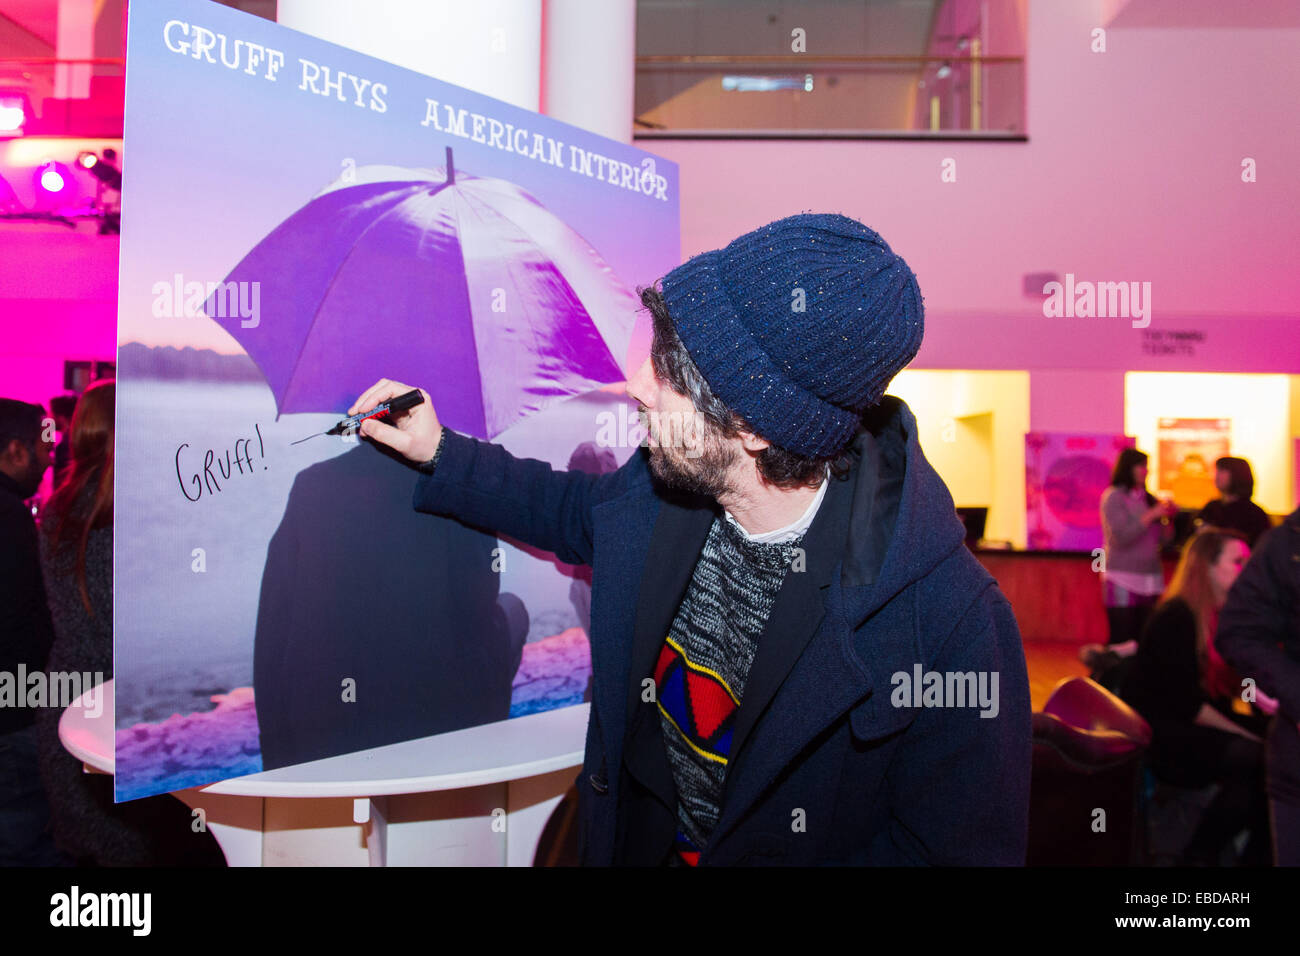 Gruff Rhys signs his Welsh Music Prize shortlisted album American Interior. Stock Photo